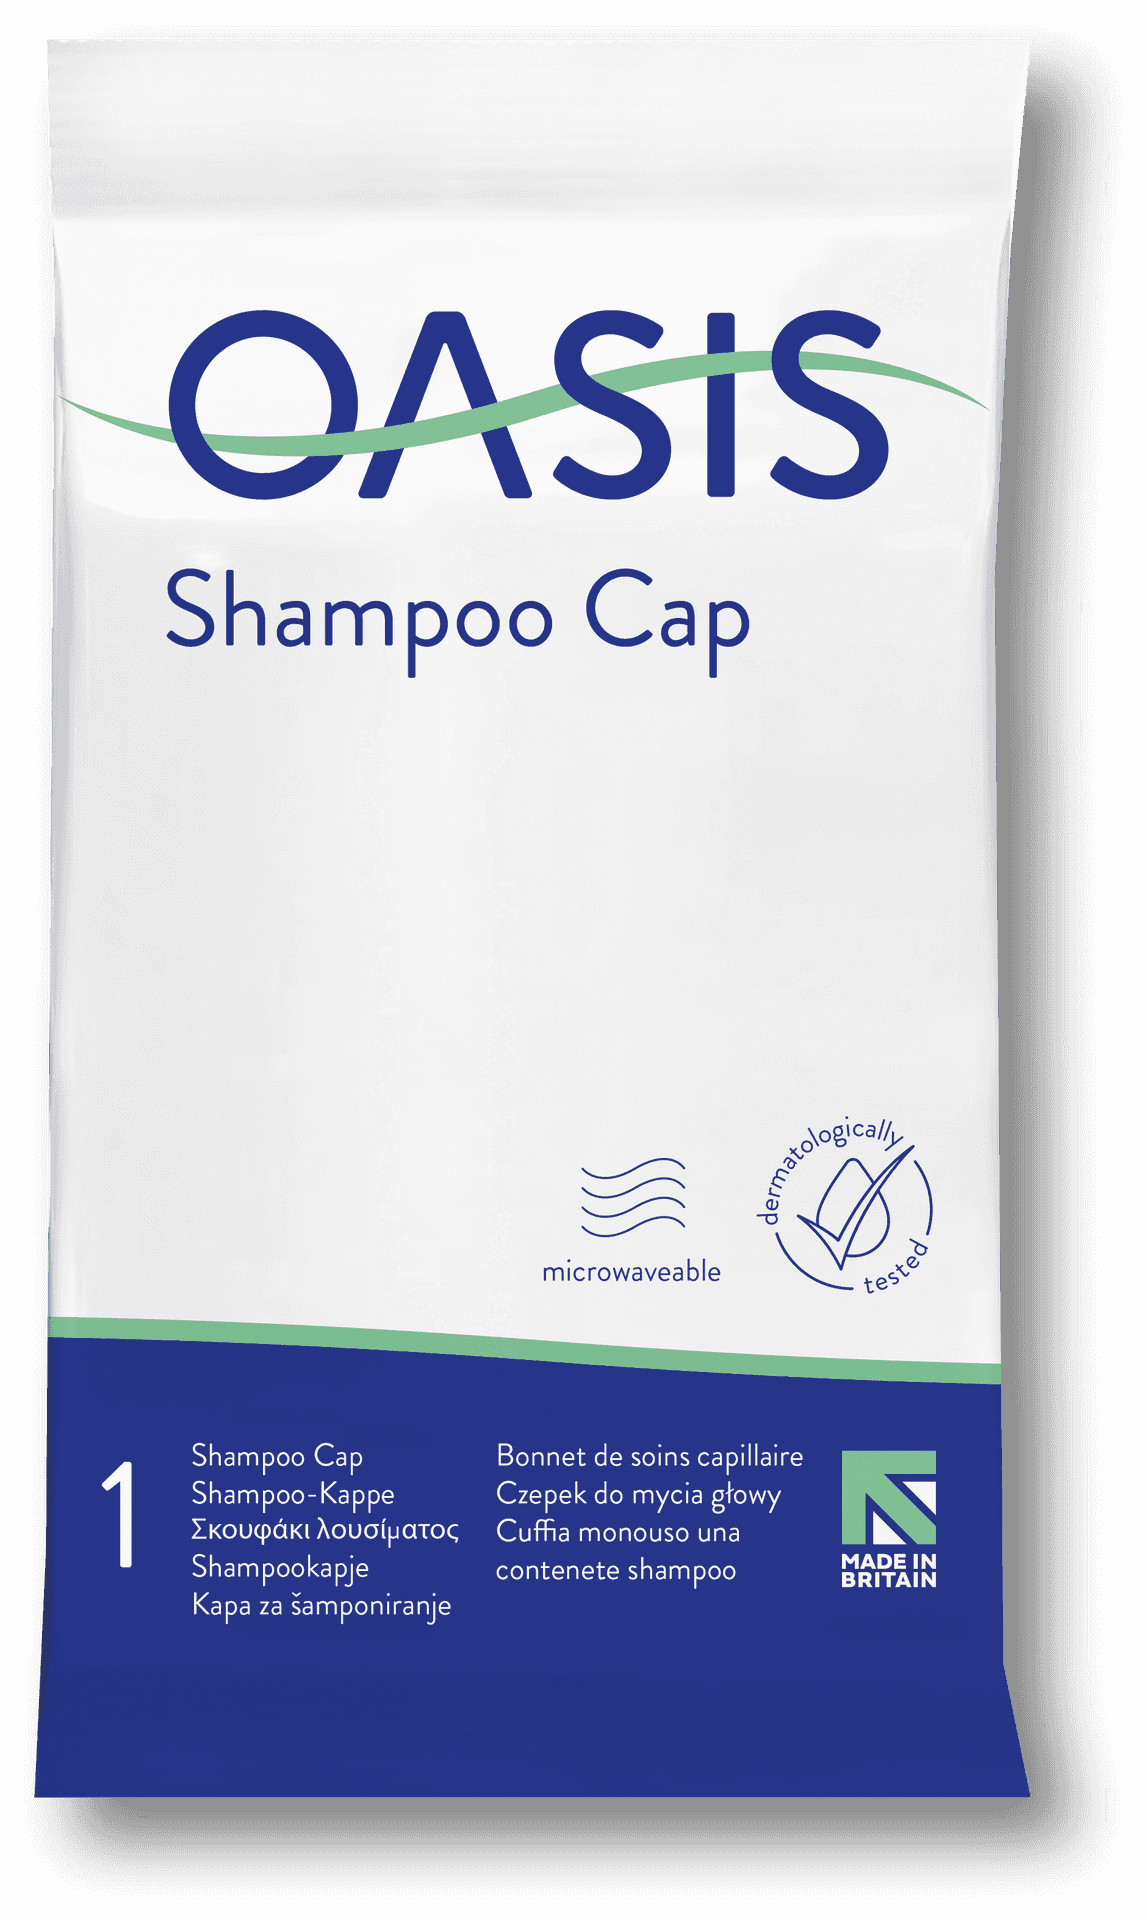 Oasis Shampoo Cap Product Packaging PNG